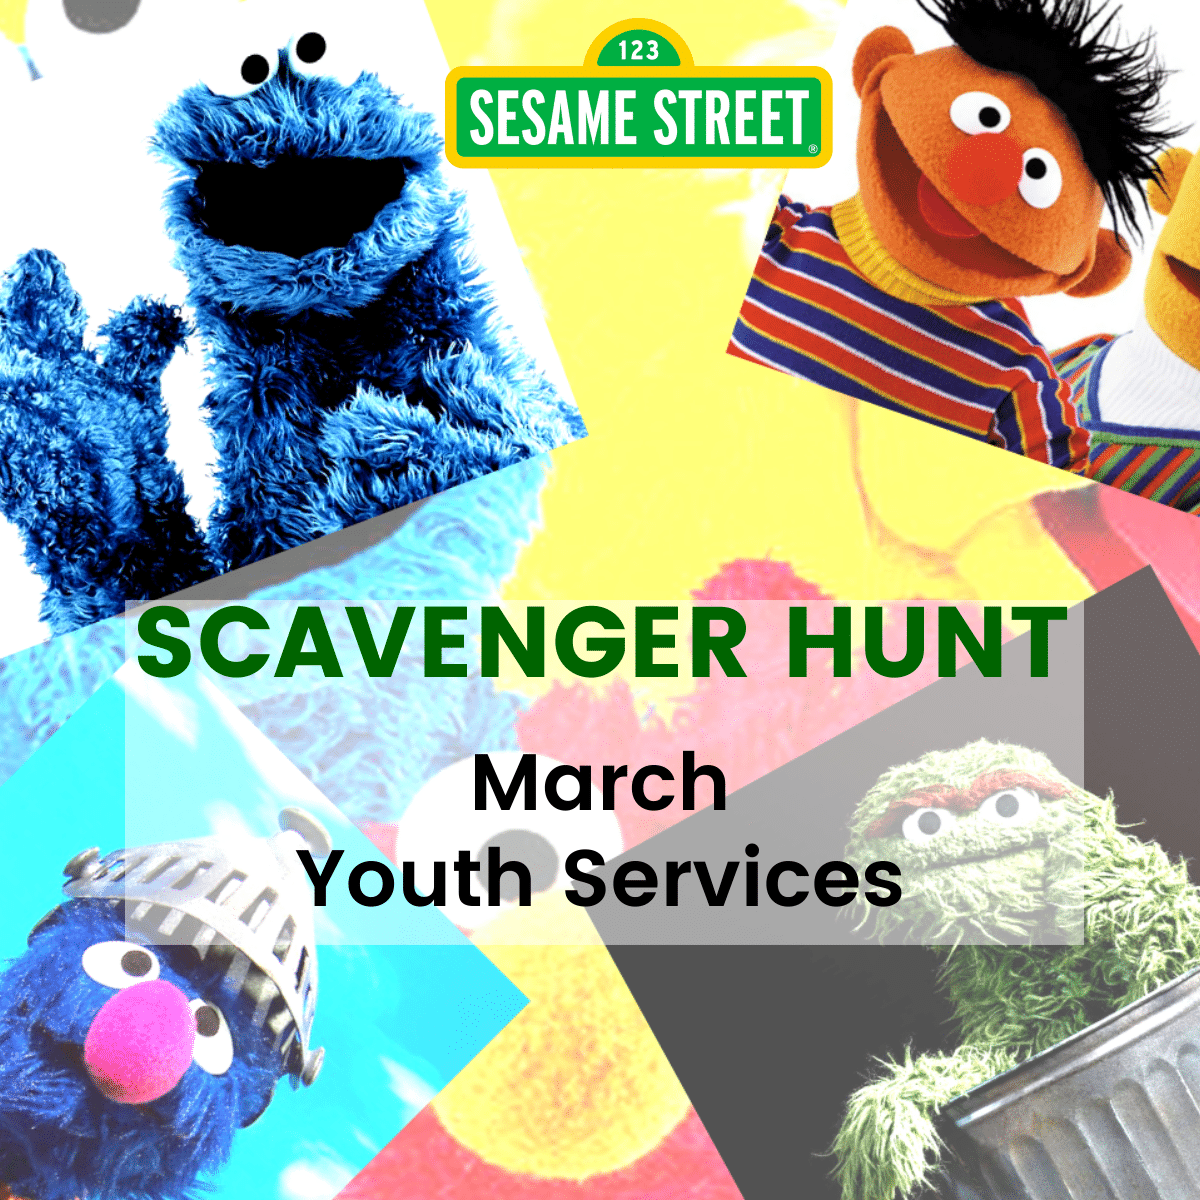 Sesame Street Scavenger Hunt, March, Youth Services